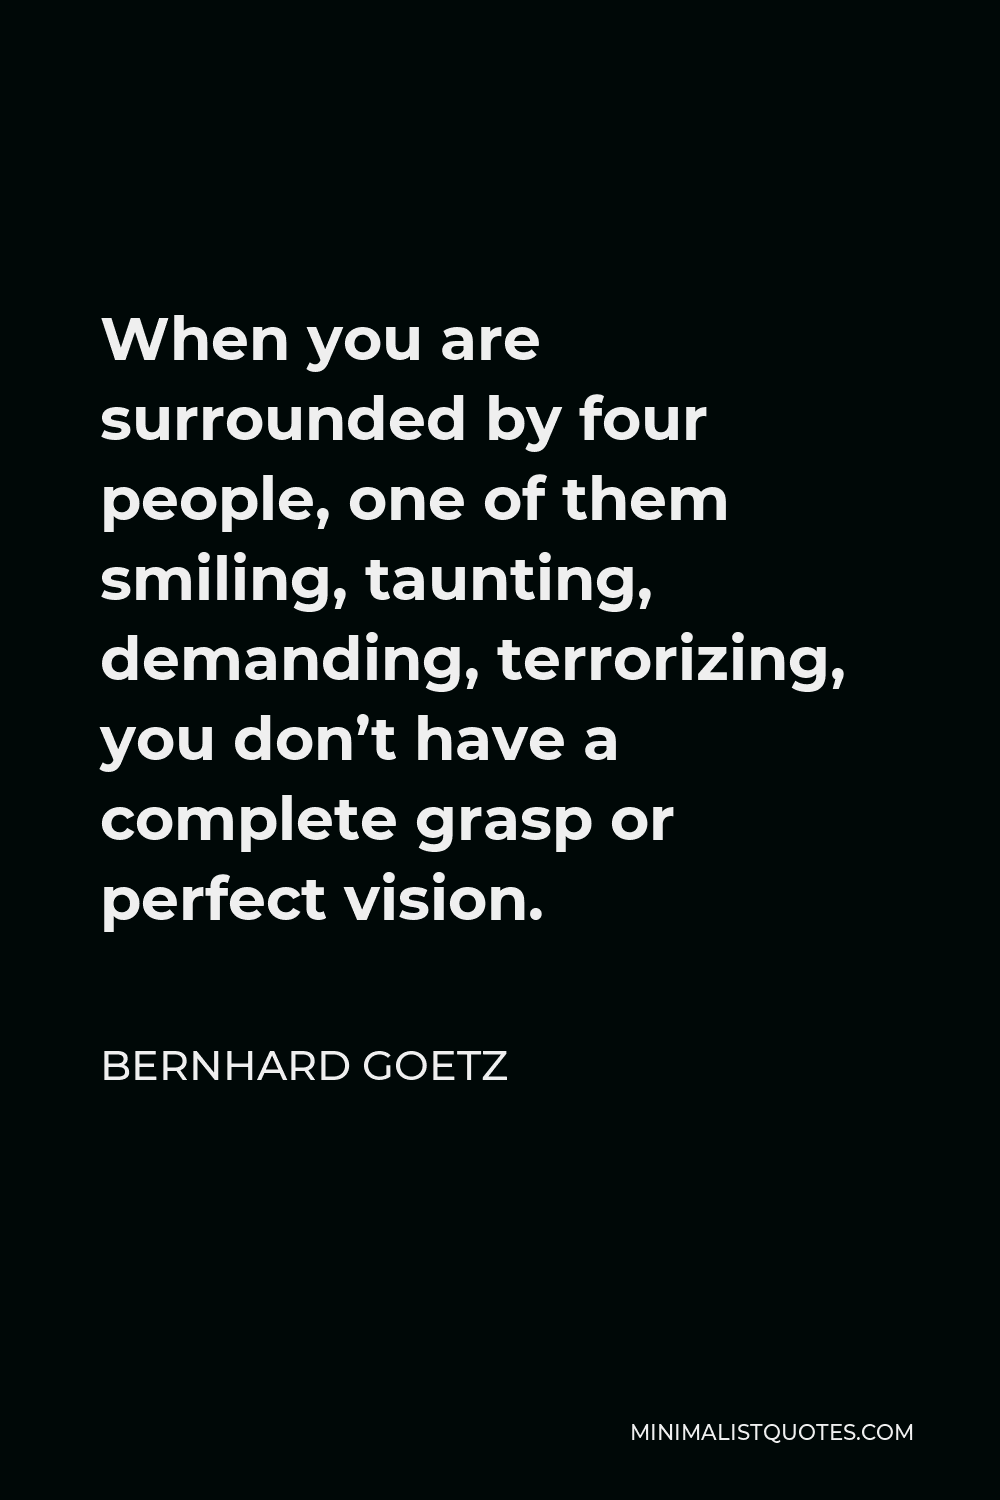 Bernhard Goetz Quote - When you are surrounded by four people, one of them smiling, taunting, demanding, terrorizing, you don’t have a complete grasp or perfect vision.